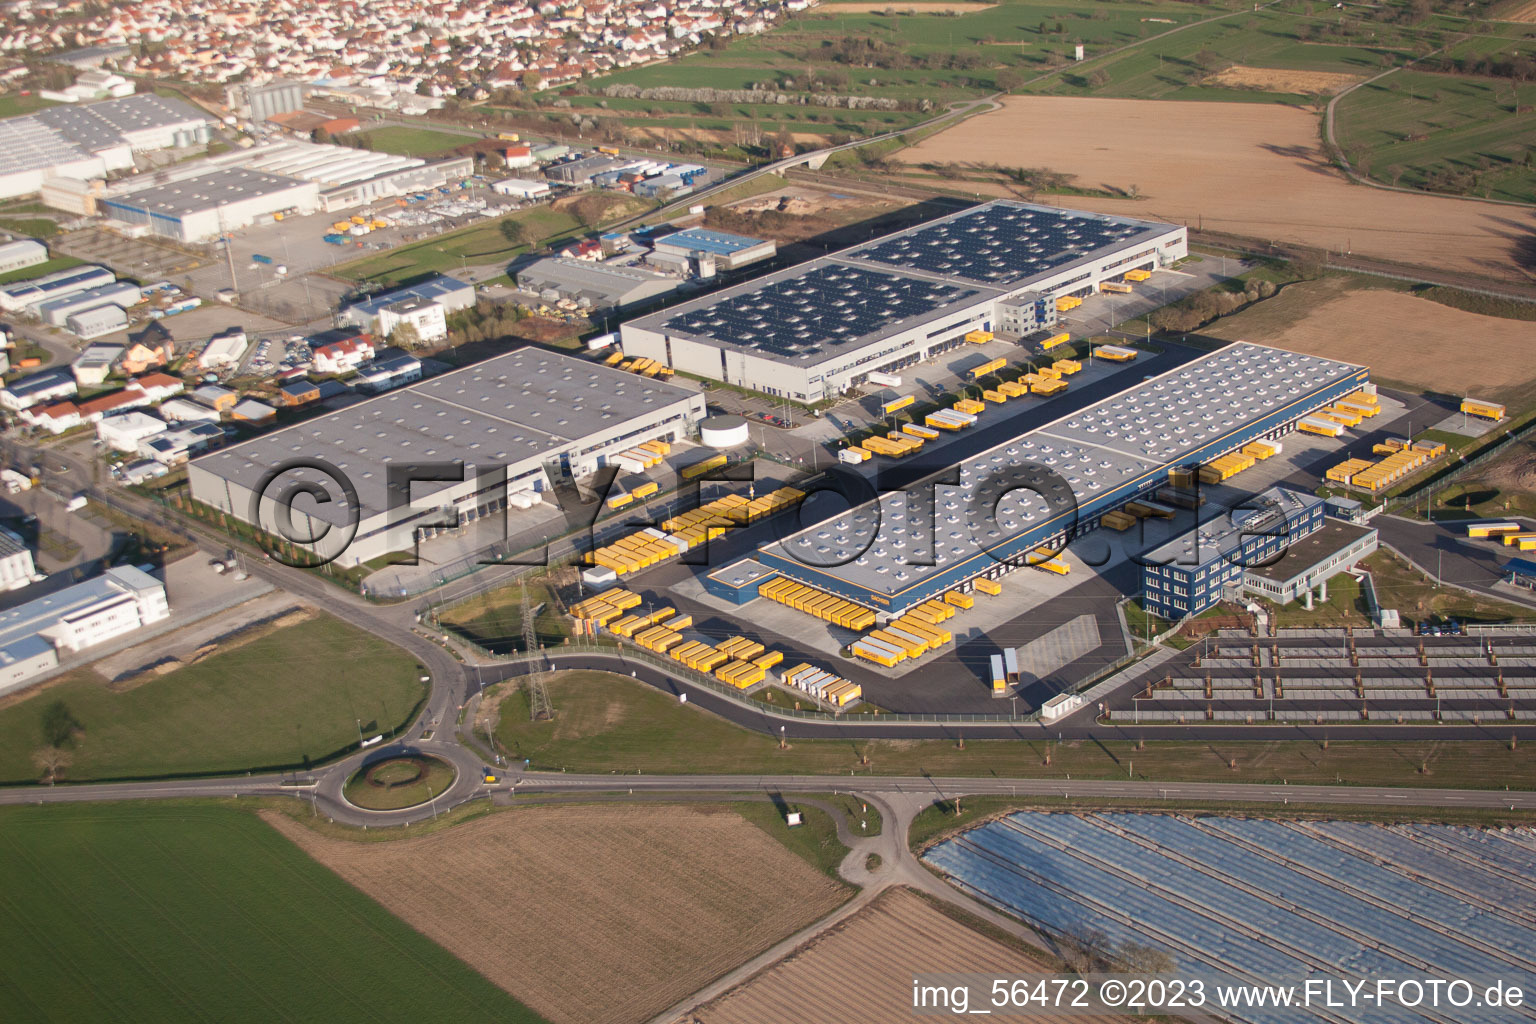 DACHSER Logistics Center Karlsruhe GmbH, Malsch in Malsch in the state Baden-Wuerttemberg, Germany from the drone perspective